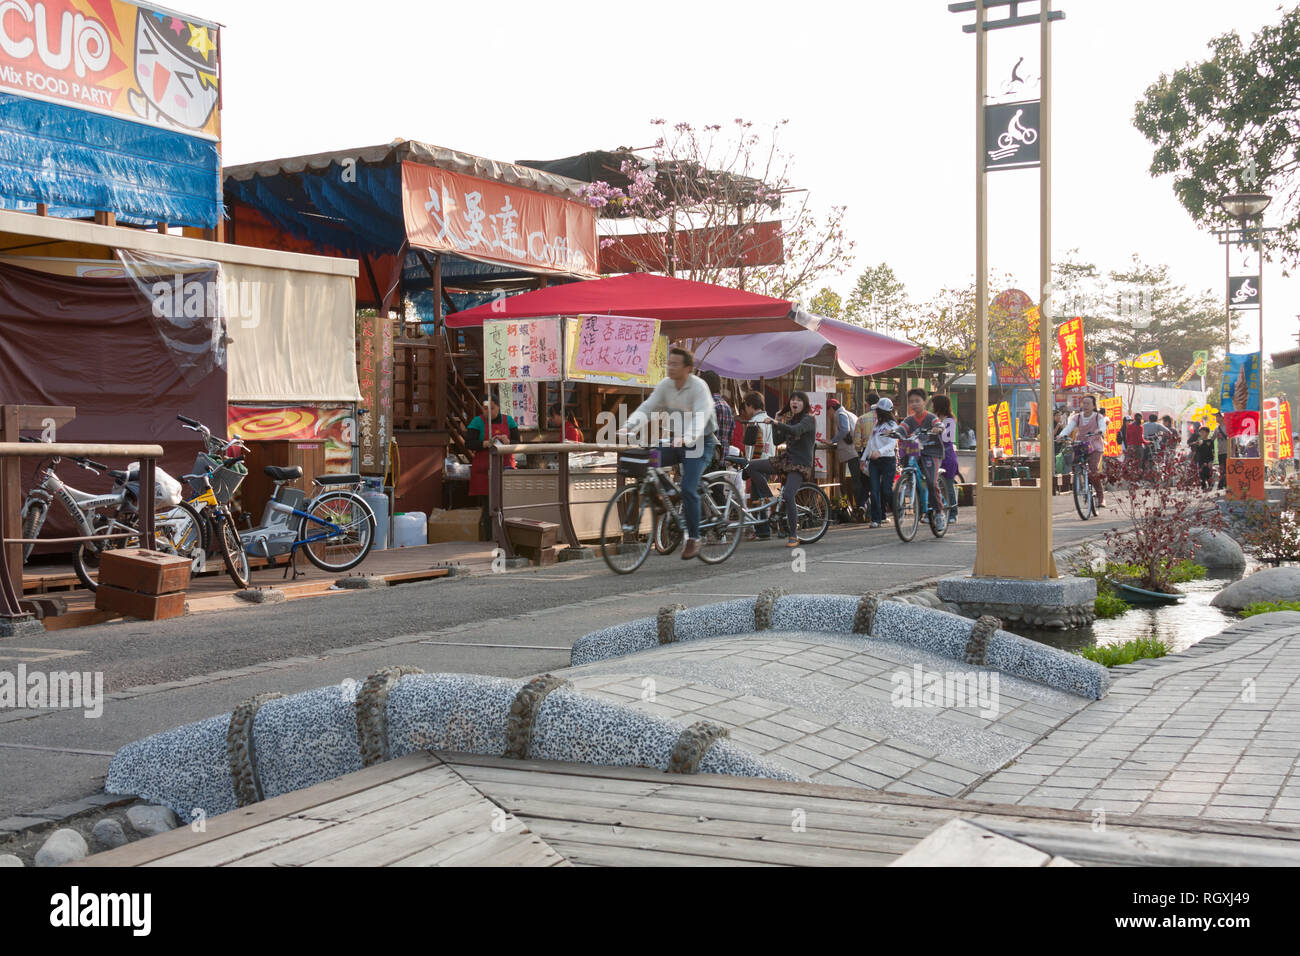 People ride past food and drink stalls, Hou-Feng Bikeway biking trail, Fengyuan District, Taichung City, Taiwan. Cycling infrastructure, leisure Stock Photo